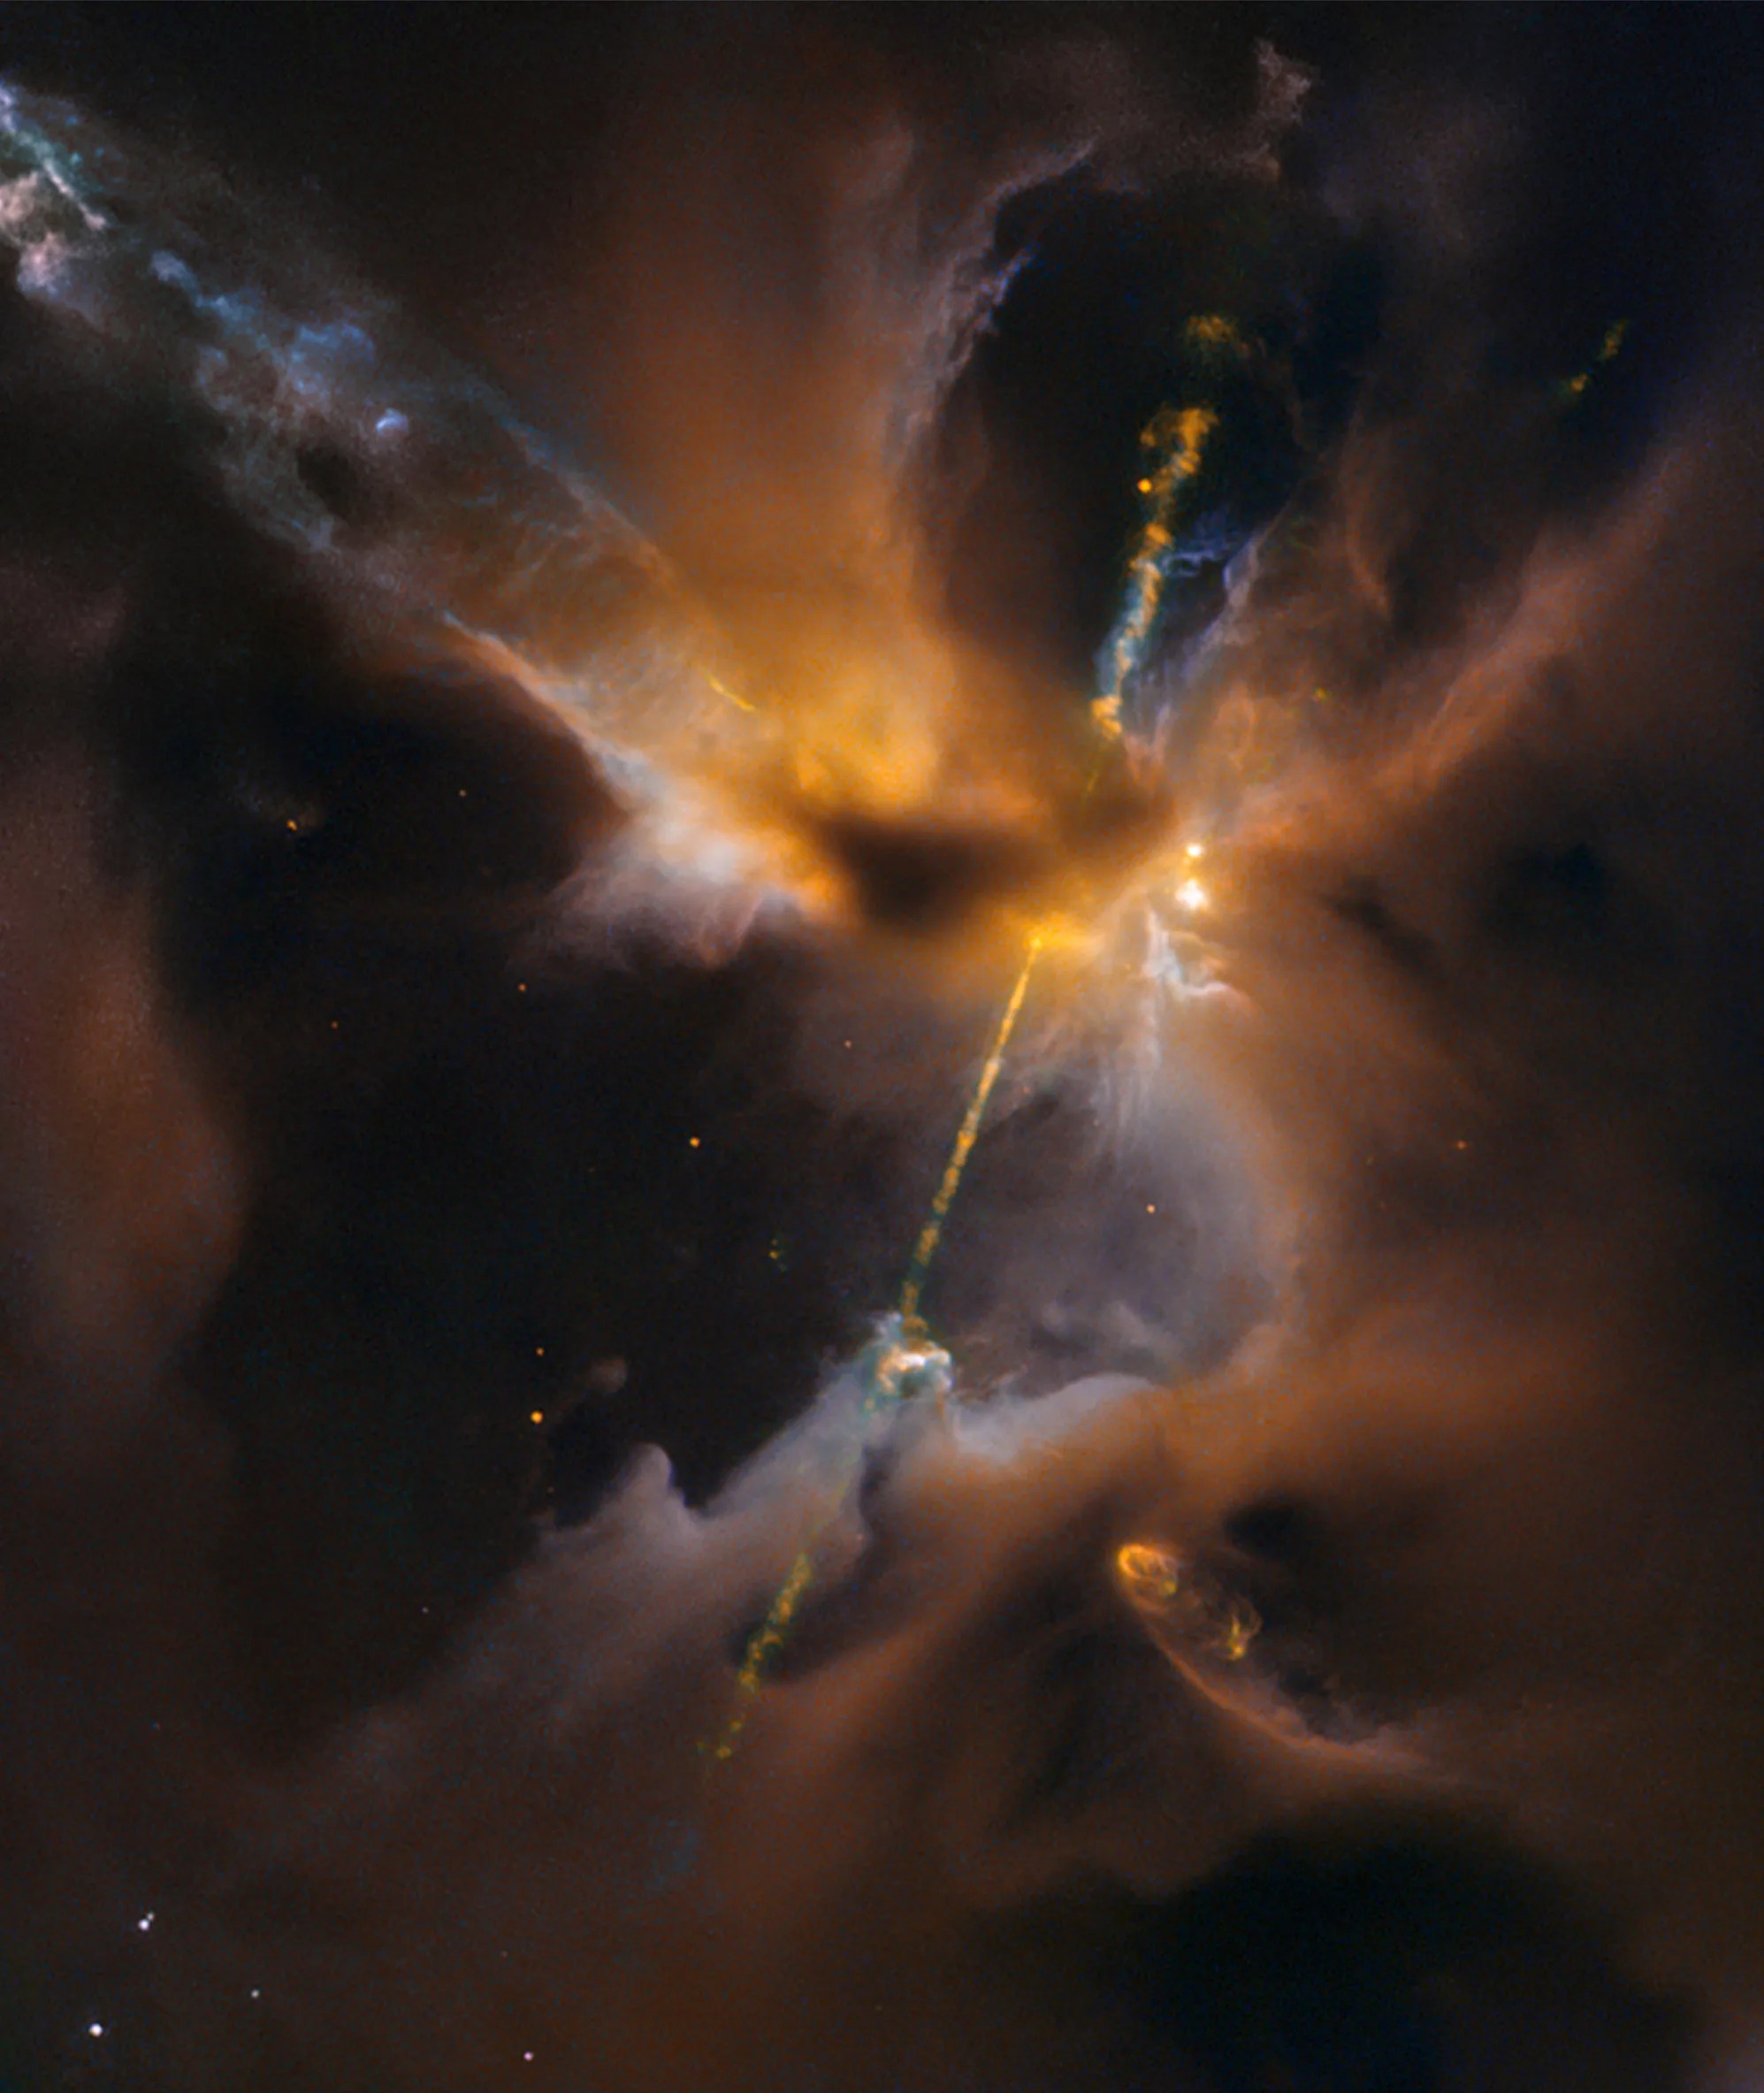 An orange and blue jet of material slashes diagonally through caverns of orange and gray colored gas and dust.